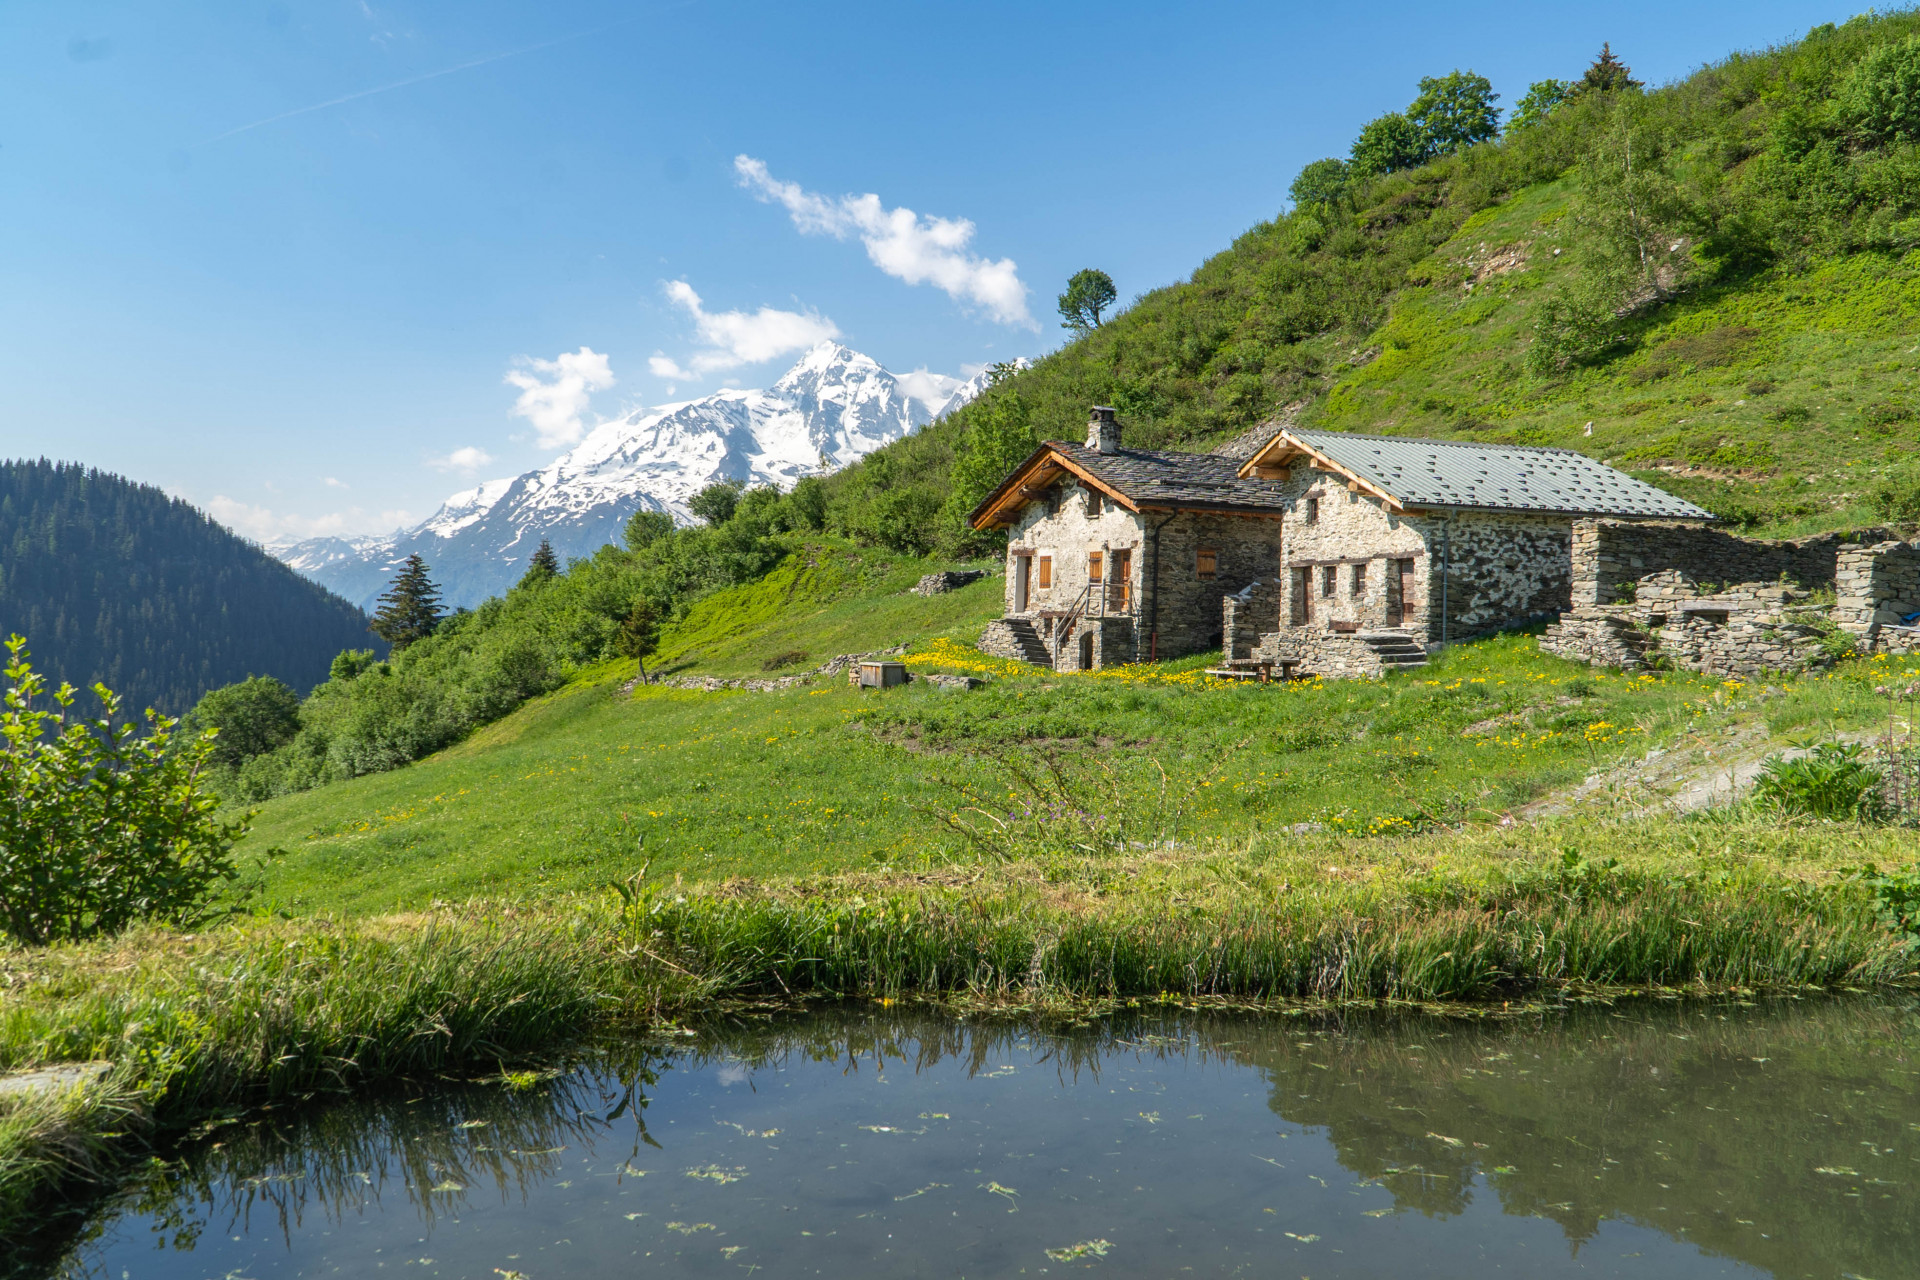 Rest and contemplation in the mountain, La Rosière Booking Service